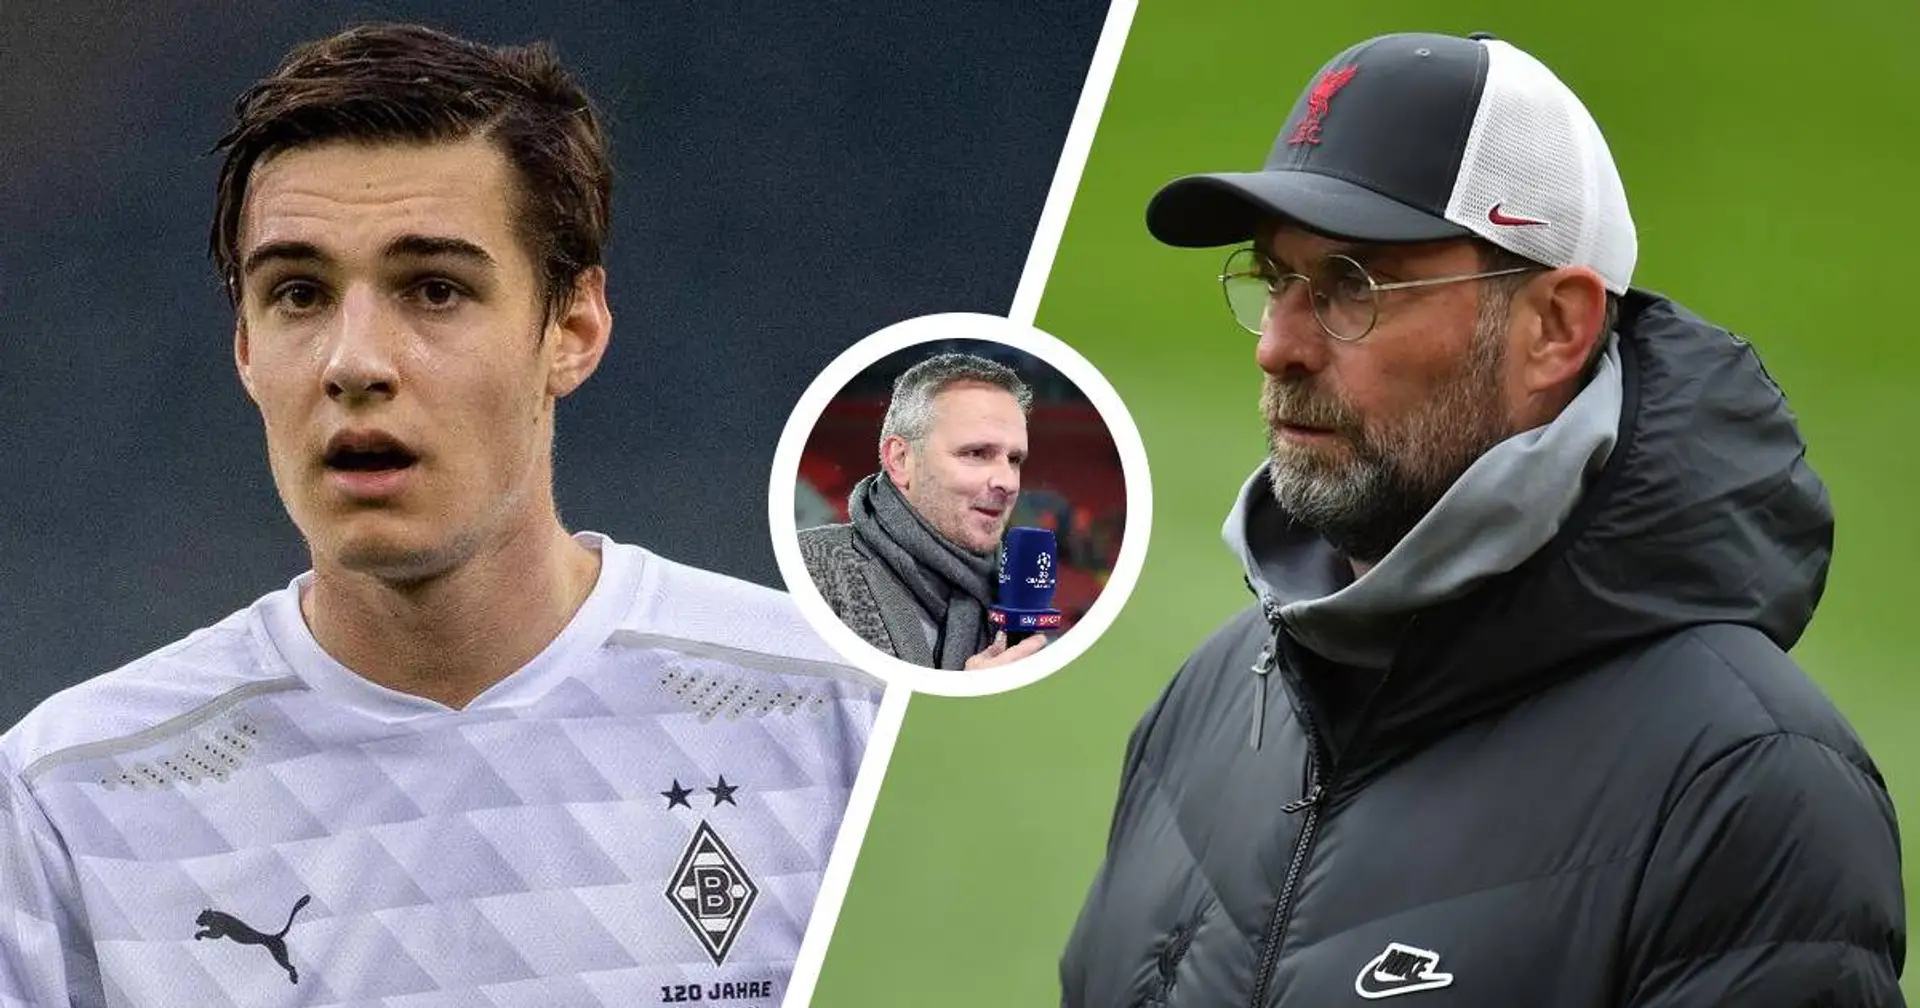 'He's a Klopp type of player': Ex-Red Hamann claims Neuhaus will be suitable signing for Liverpool